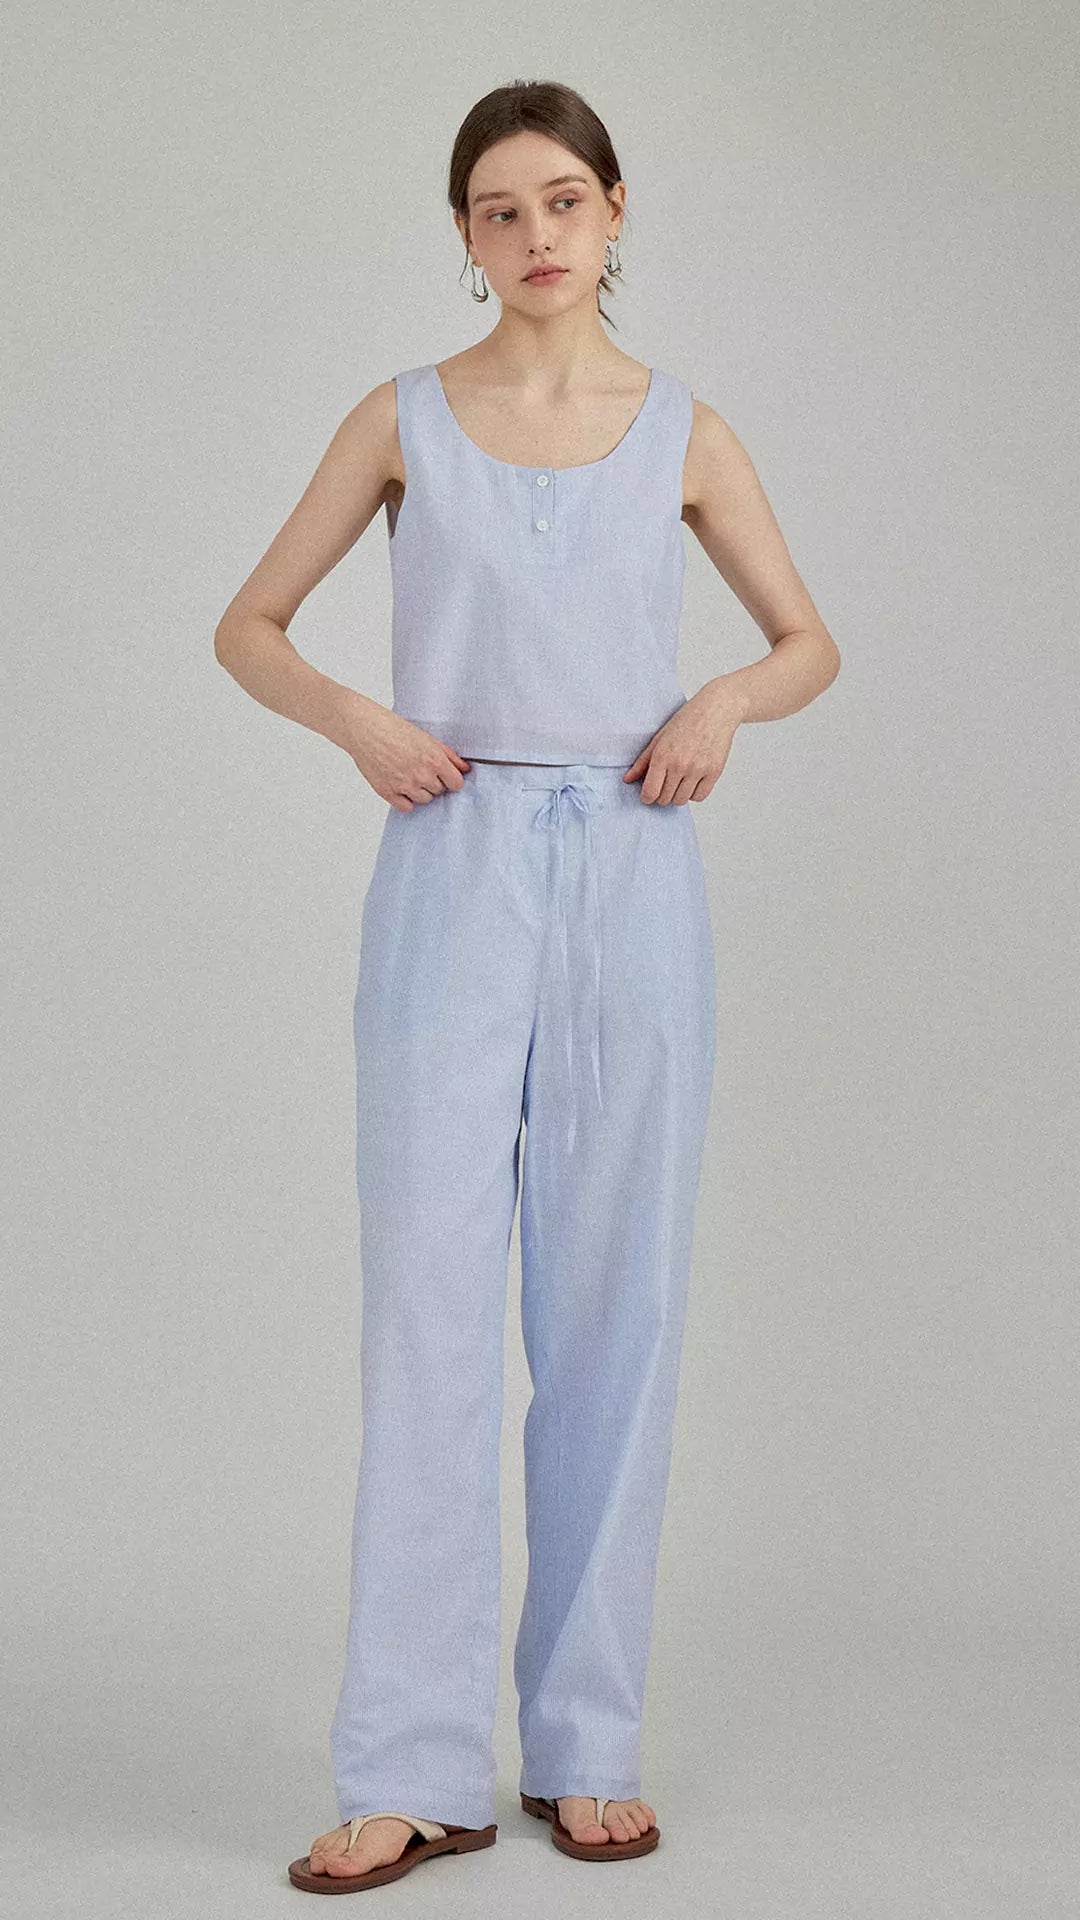 Linen Blue and White Striped Loungewear Set (Top and Pants)